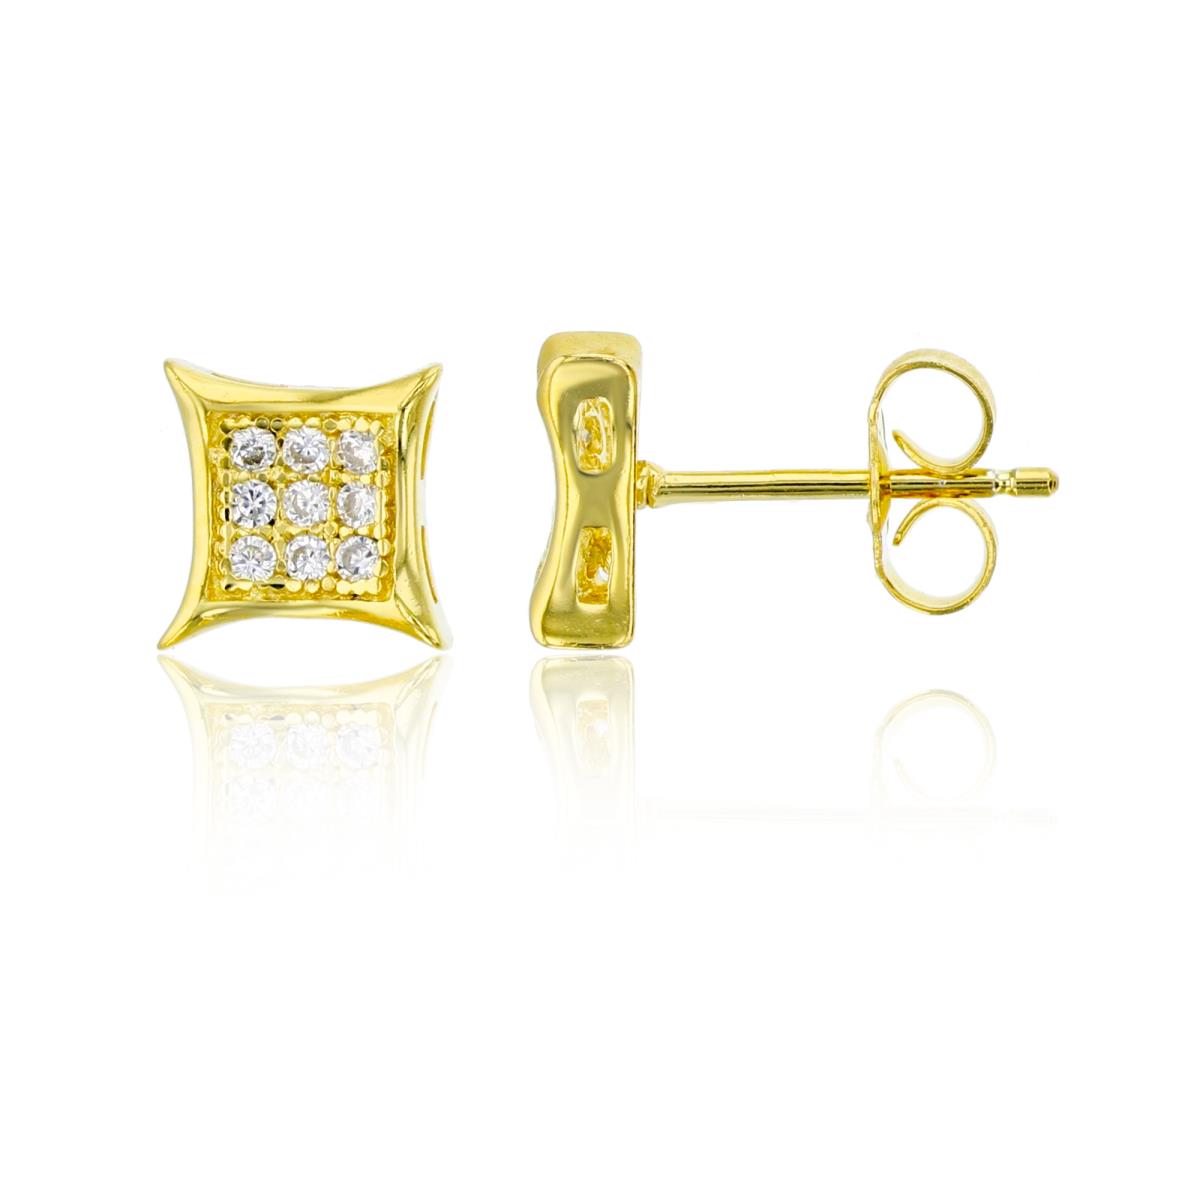 Sterling Silver Yellow 7.8x7.8mm Curved Square Stud Earring